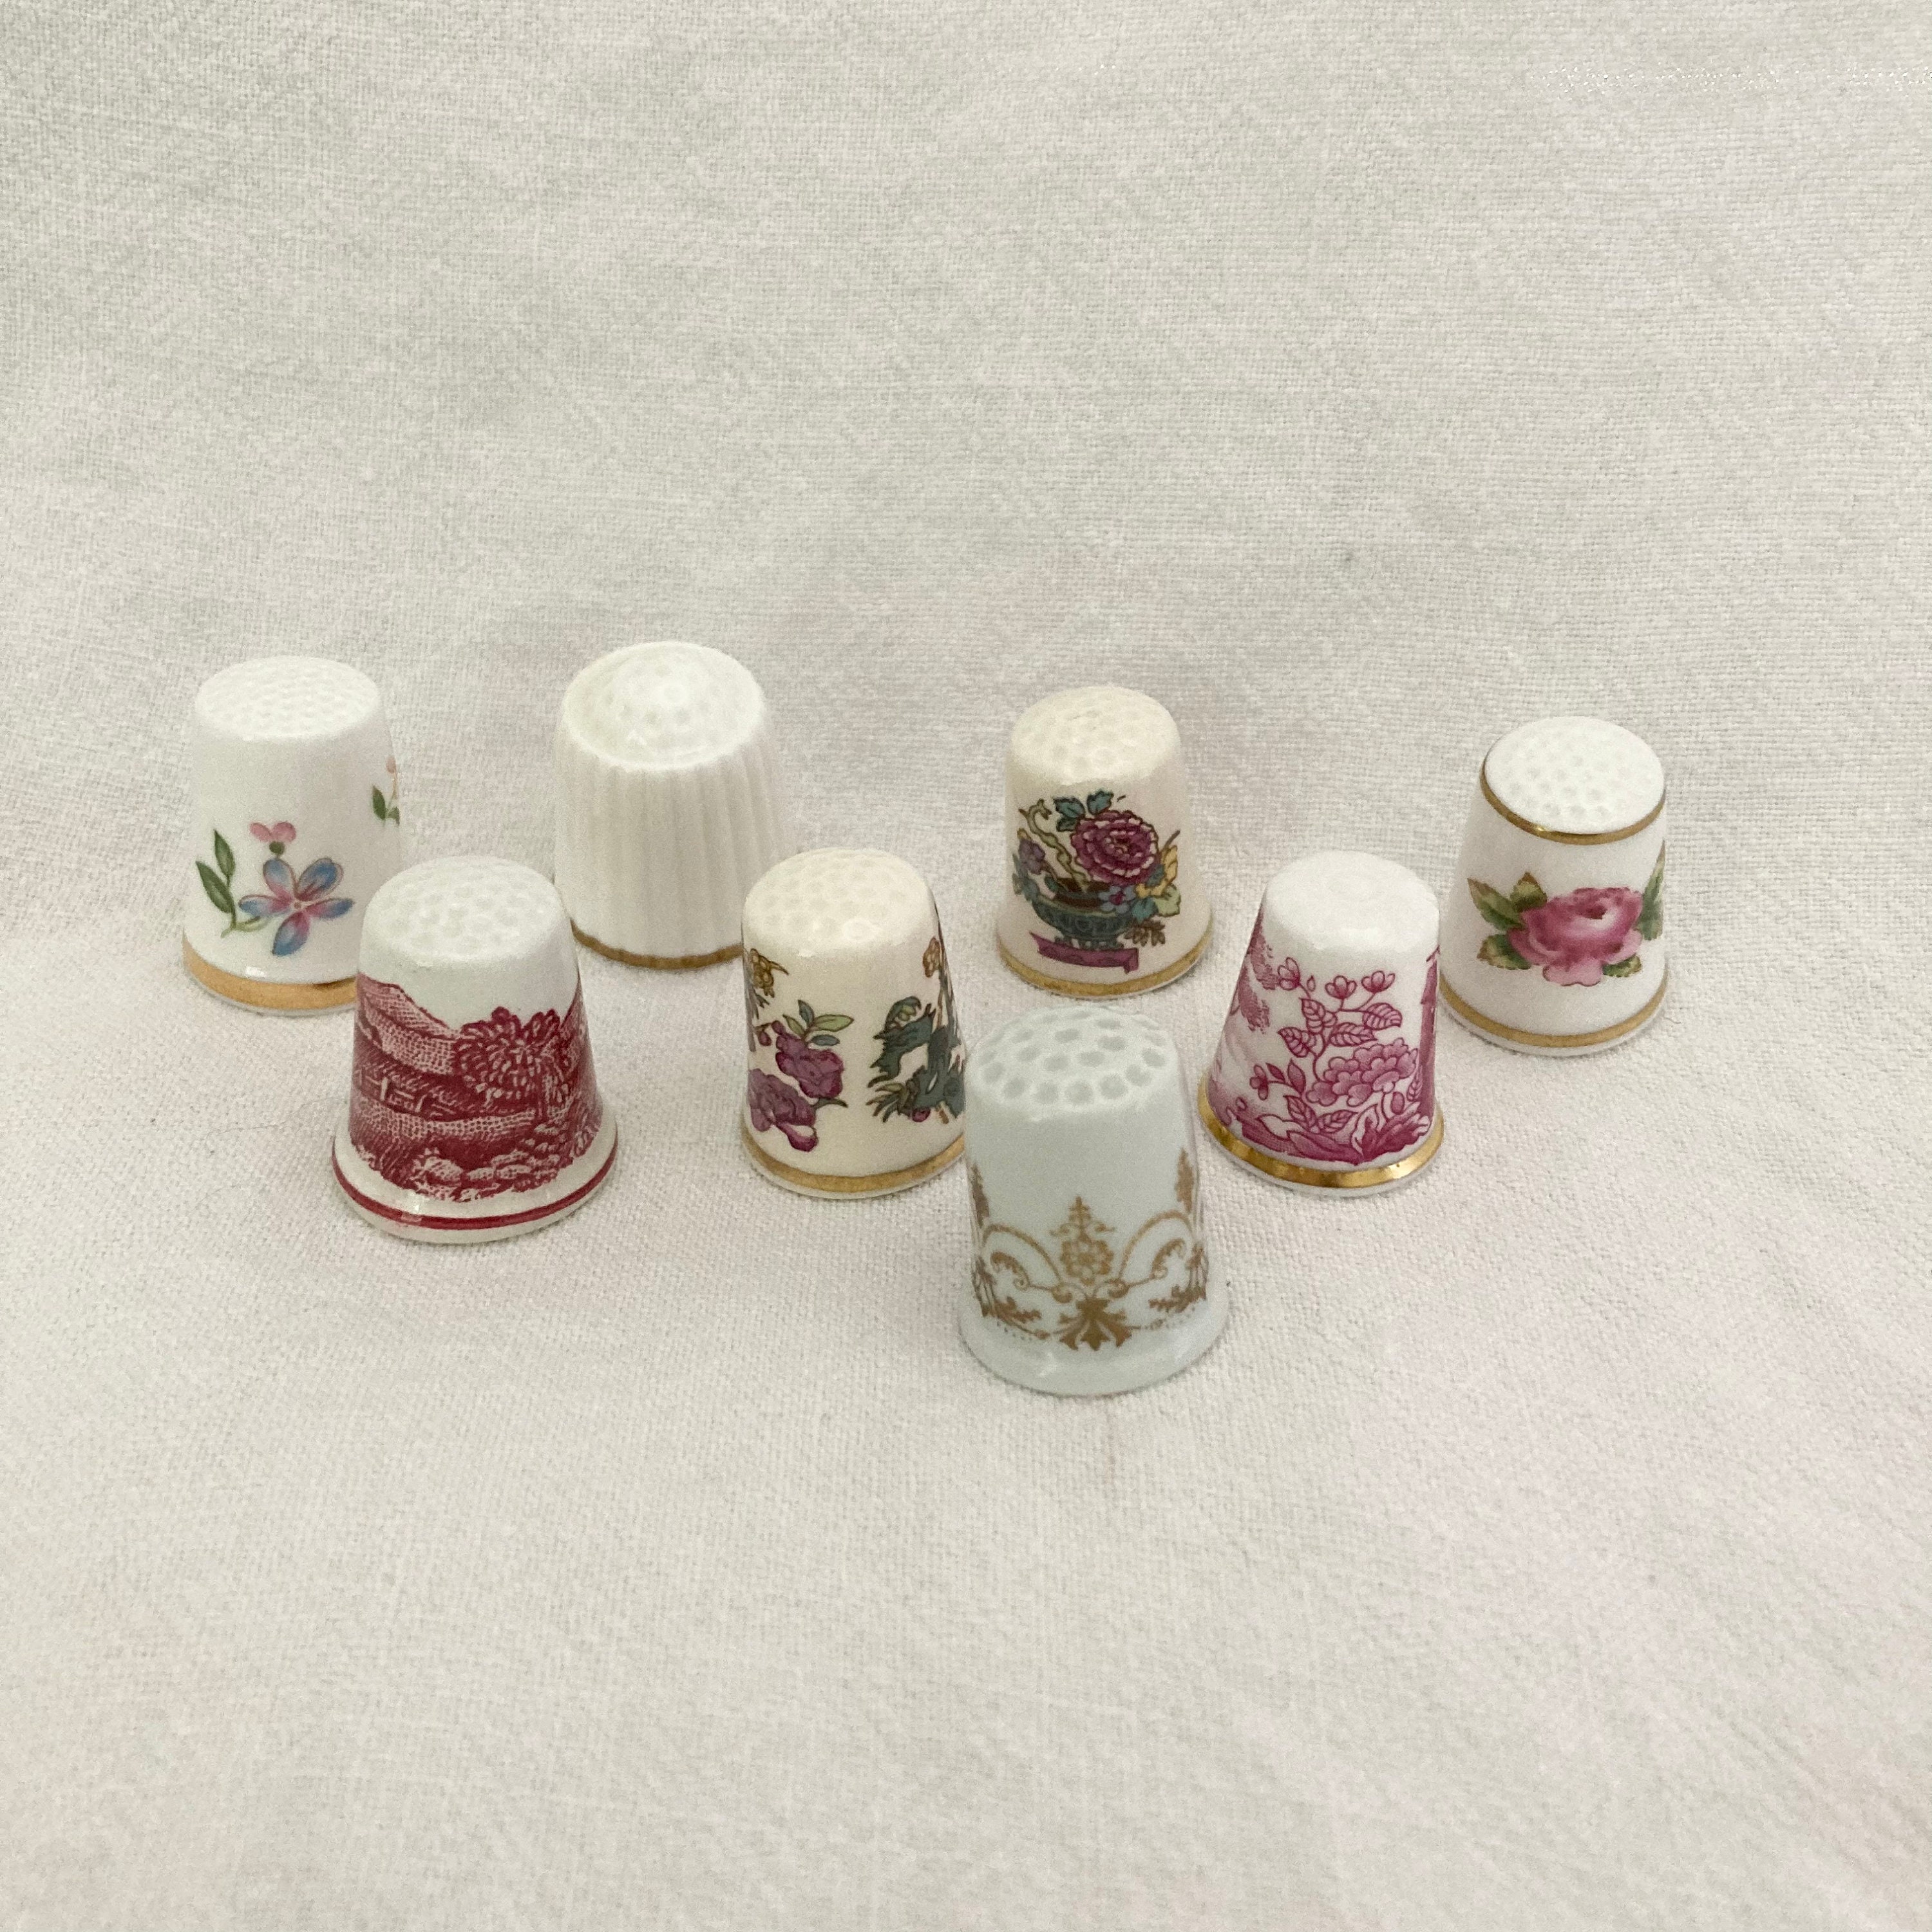 Metal Thimble 'prym', Finger Protector for Hand Embroidery and Quilting, Hand  Sewing Thimbles, Needle Protectors 